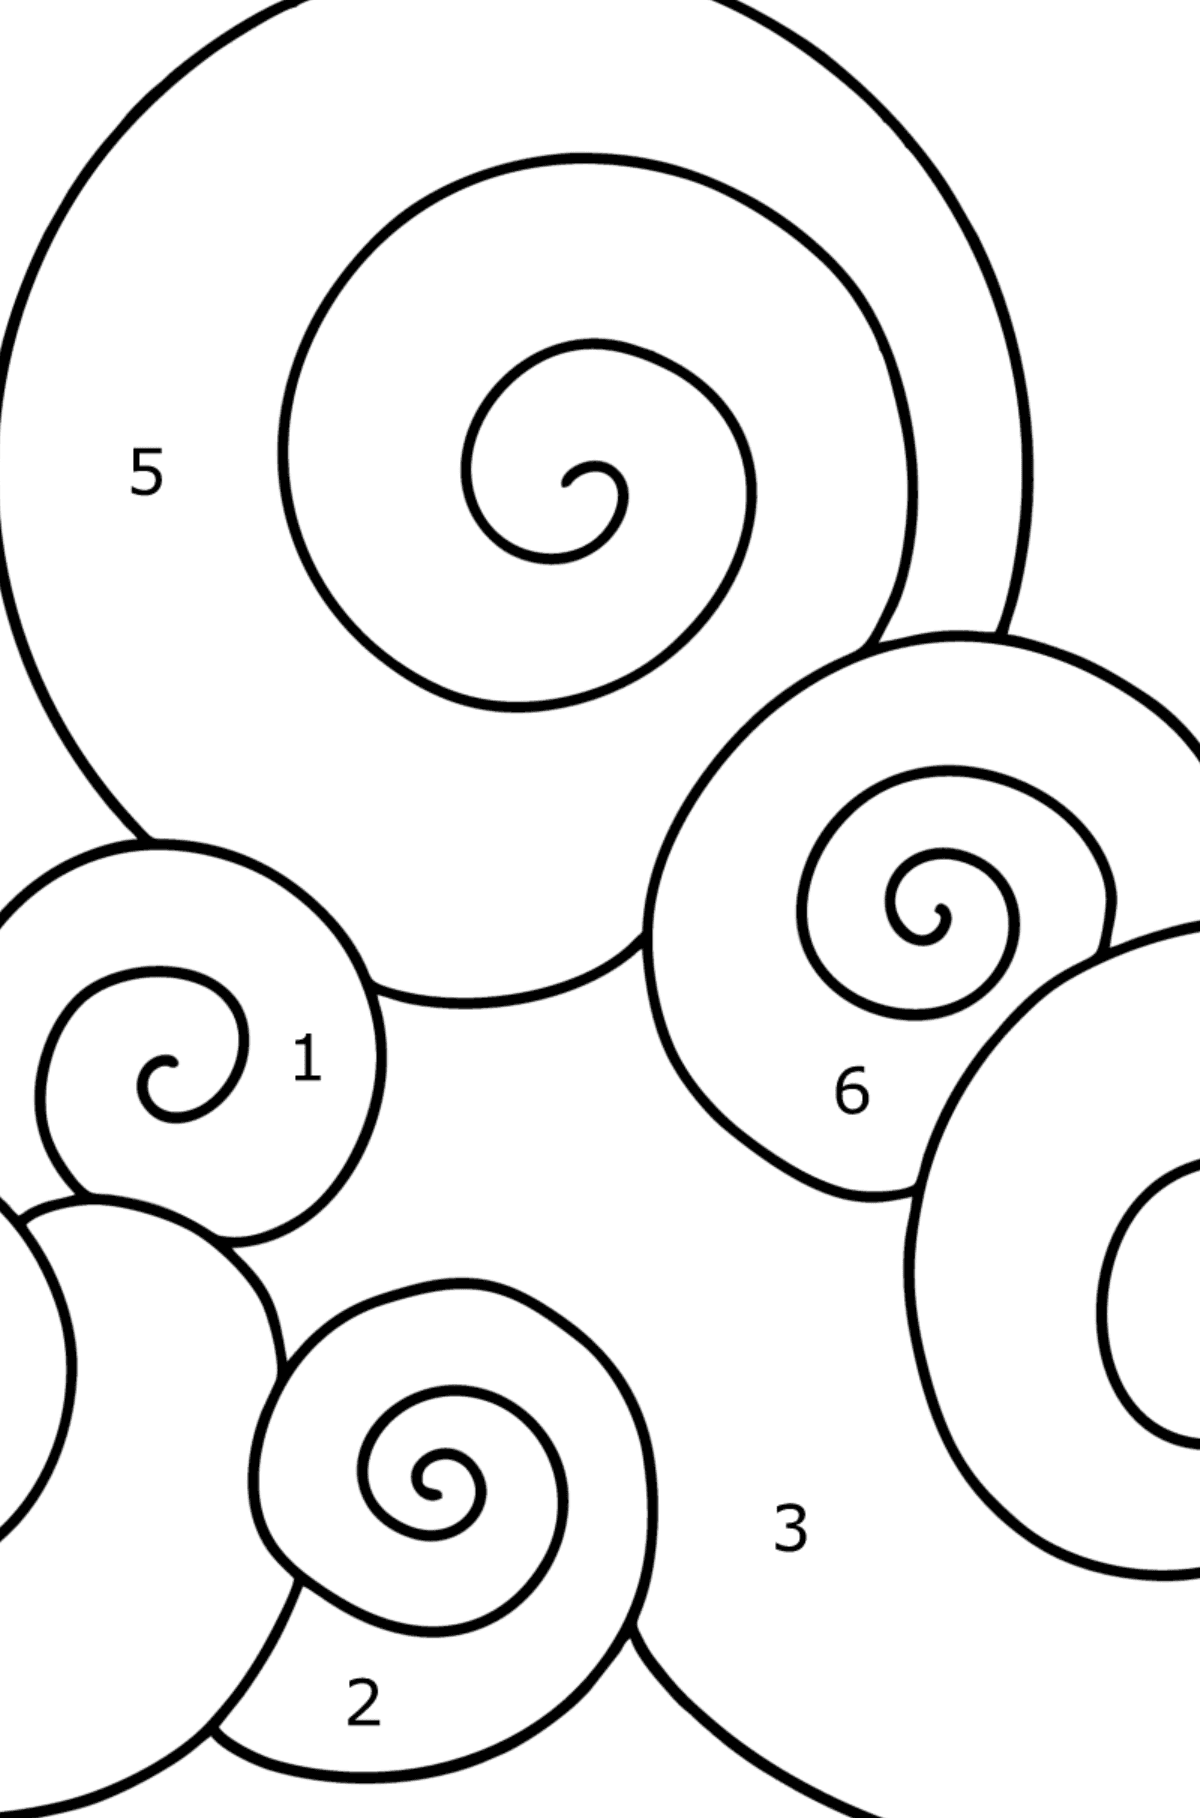 Simple Zen clouds coloring page - Coloring by Numbers for Kids